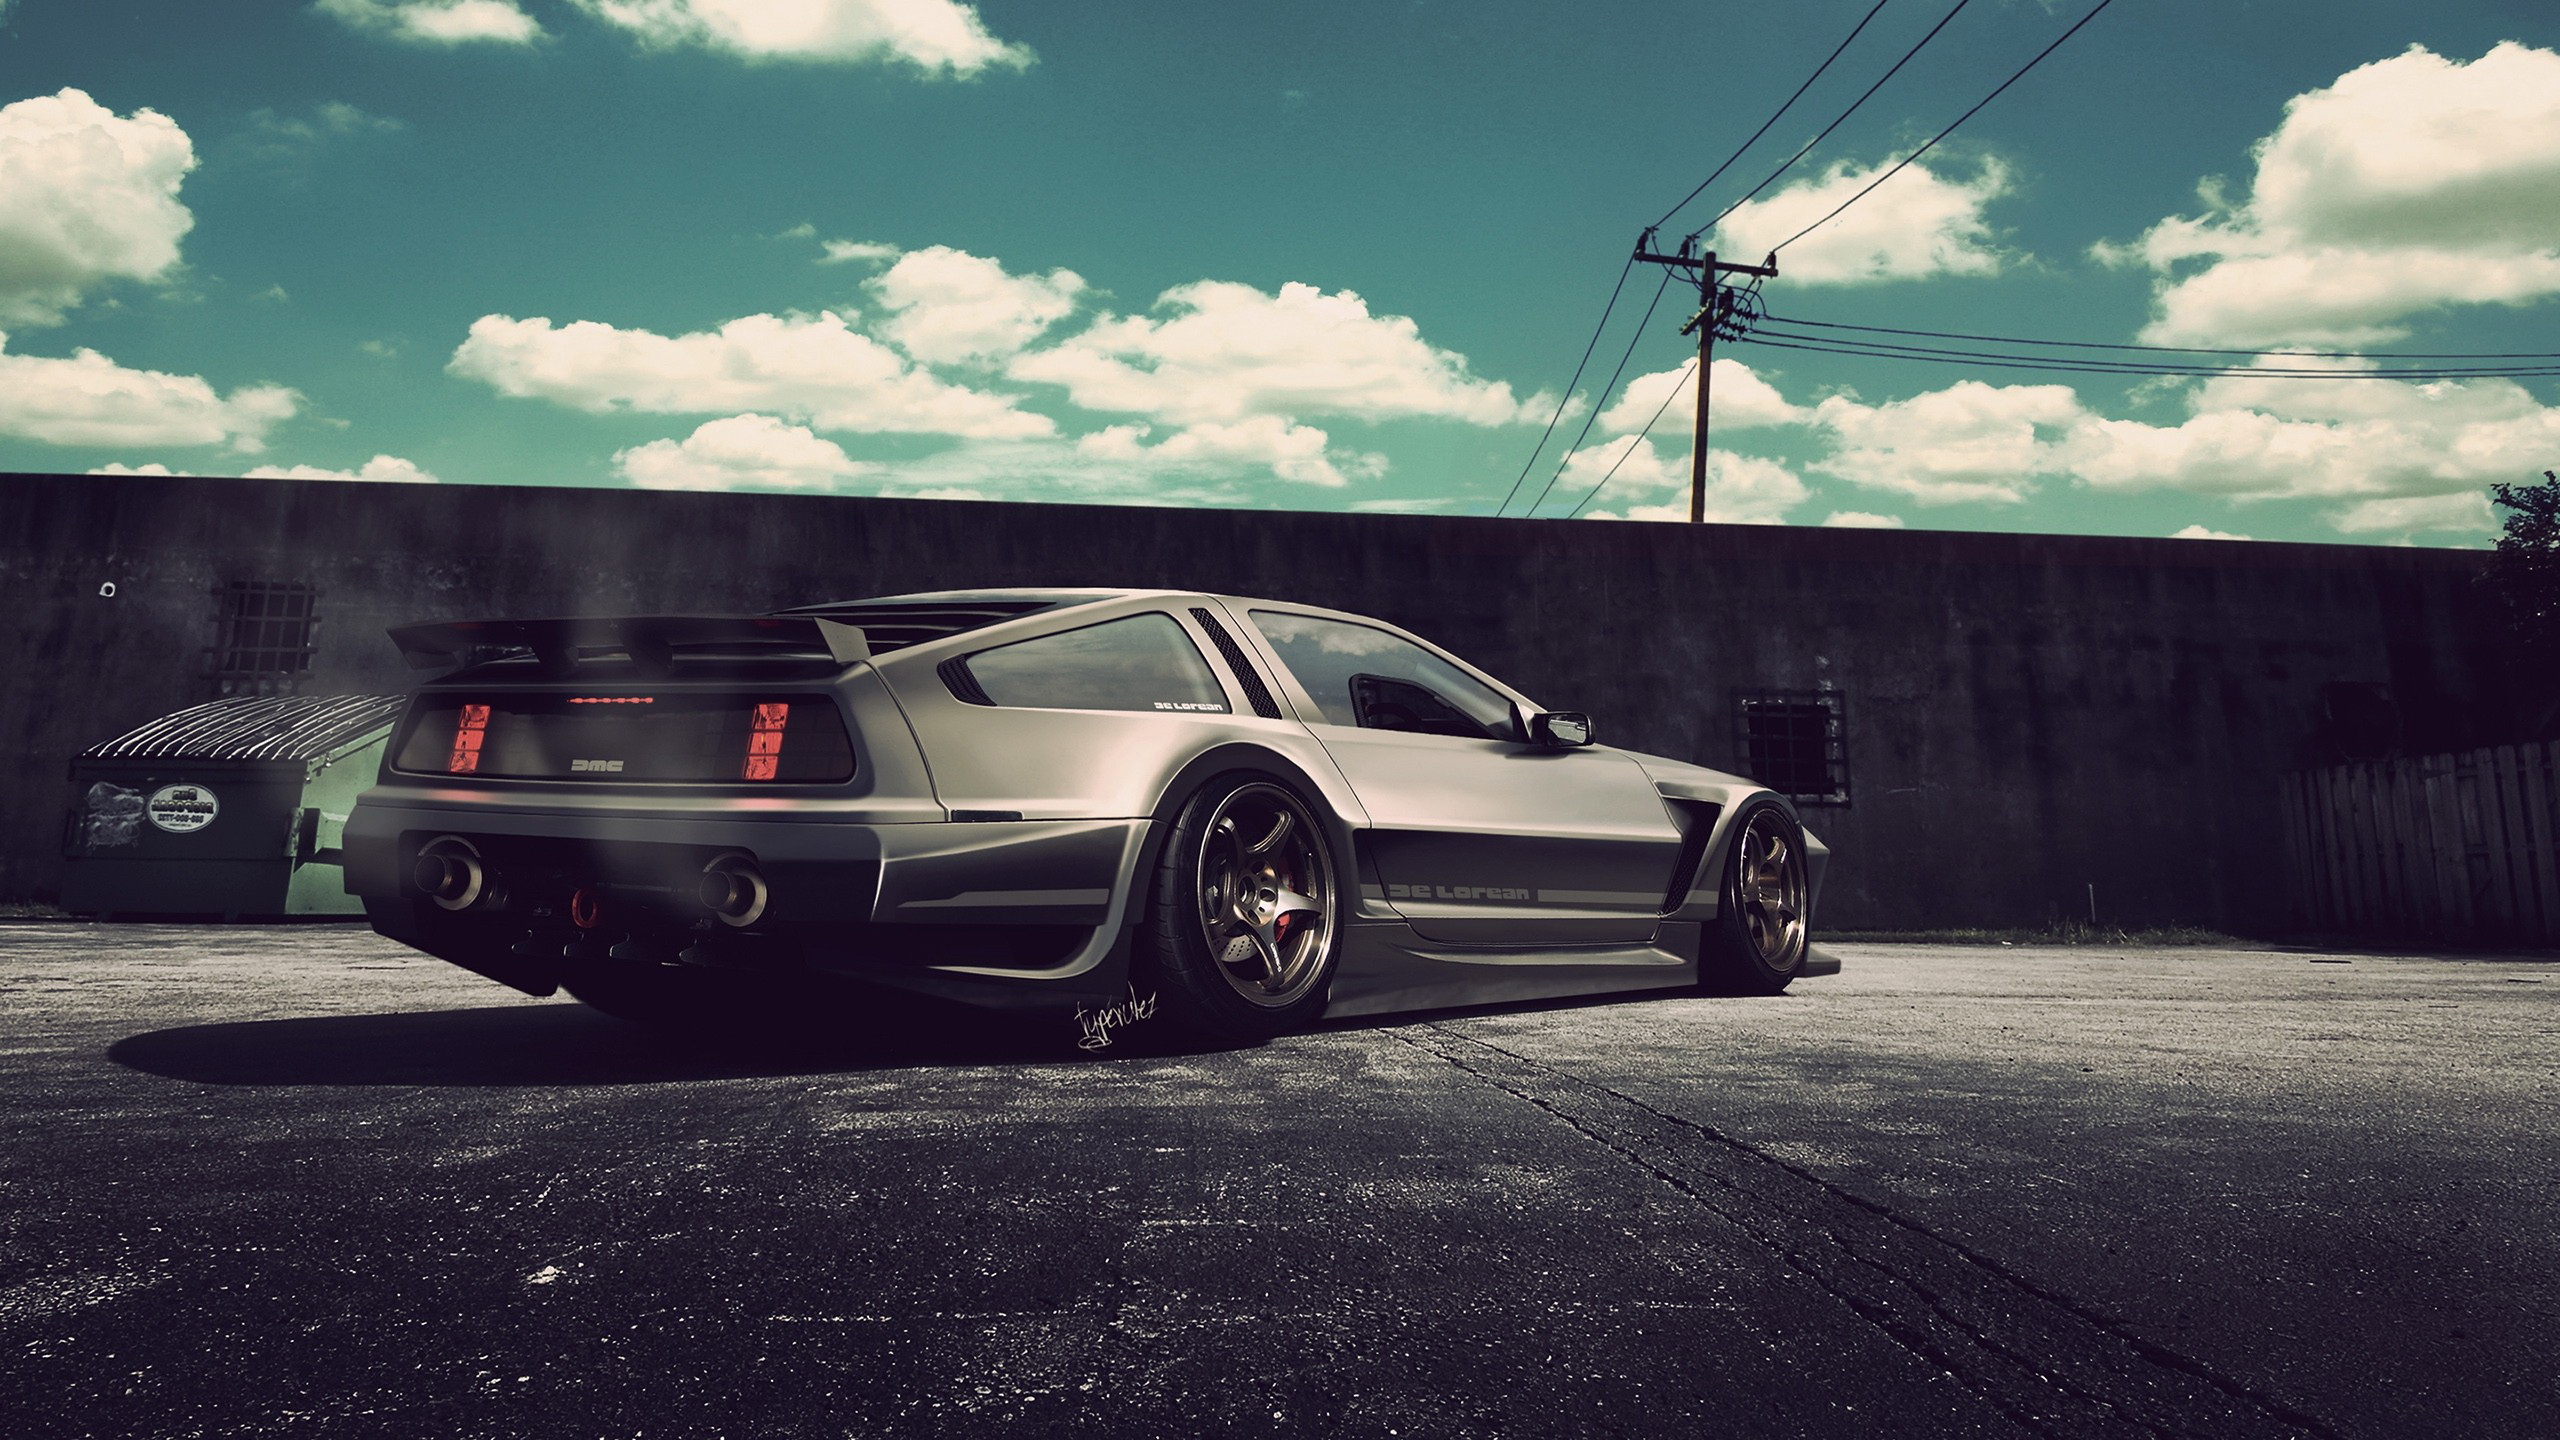 Wallpapers coupe tuning sports car on the desktop